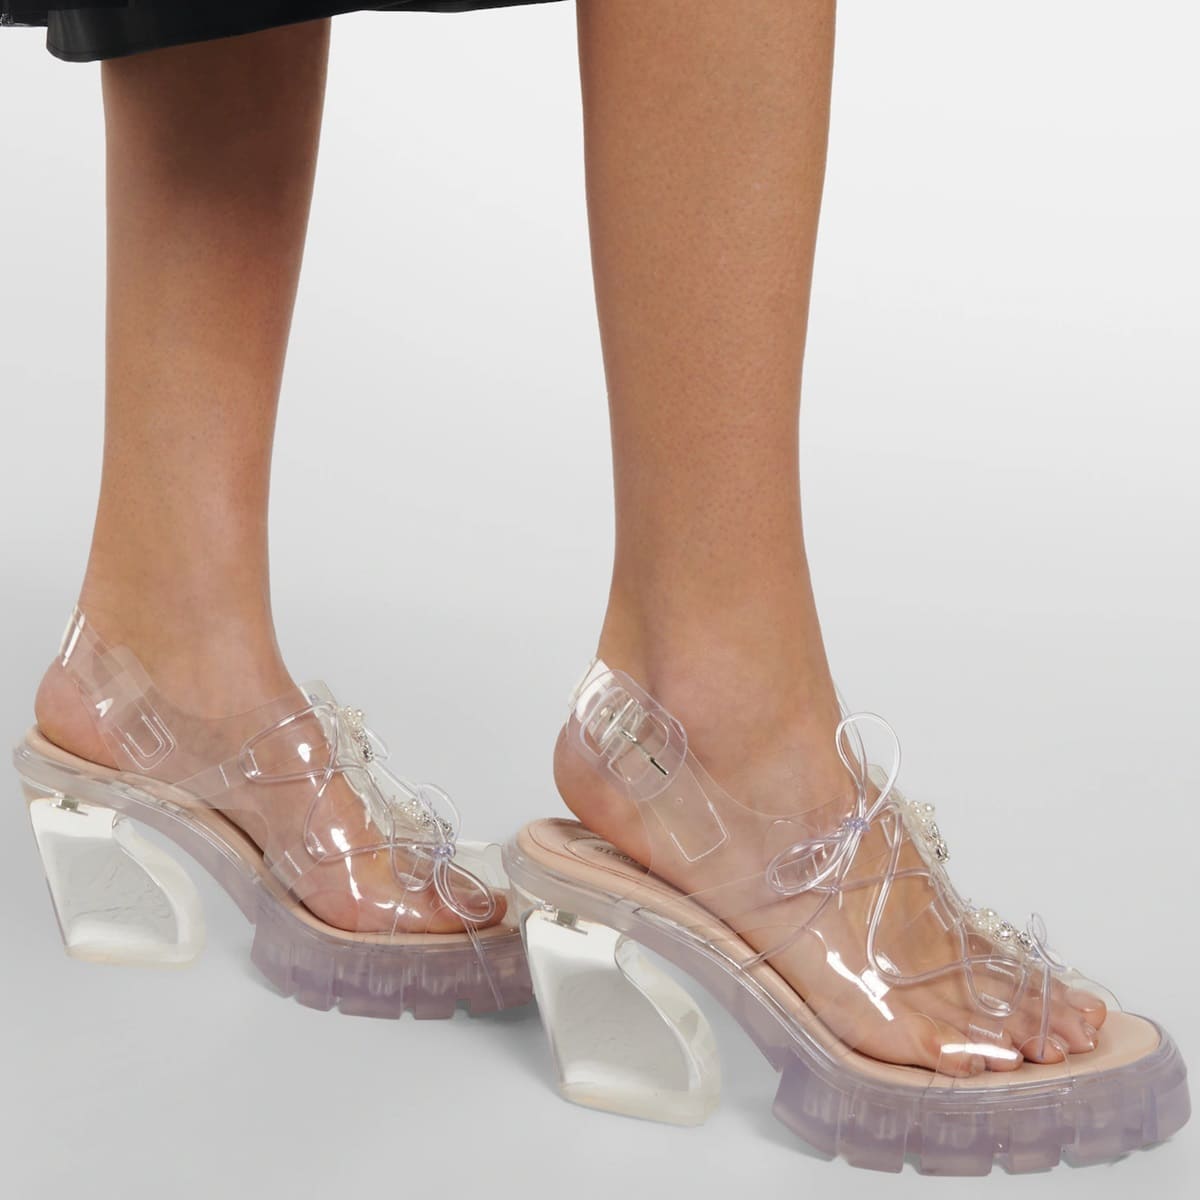 Simone Rocha's Trek sandals feature a lace-up design made of clear PVC, thick rubber soles, slanted block heels, and a comfortable leather insole